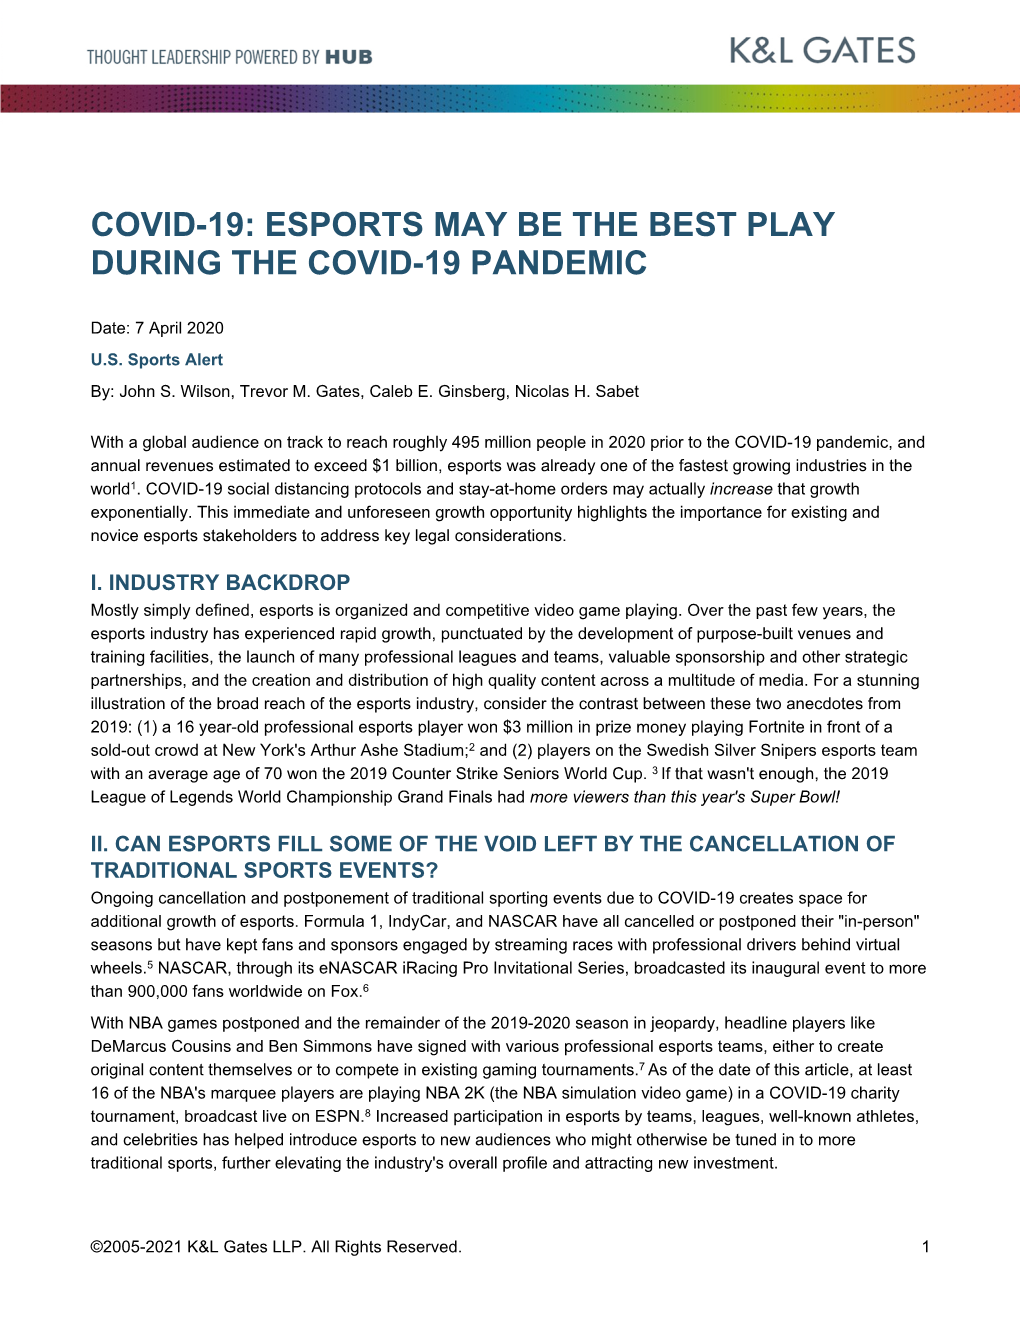 Covid-19: Esports May Be the Best Play During the Covid-19 Pandemic